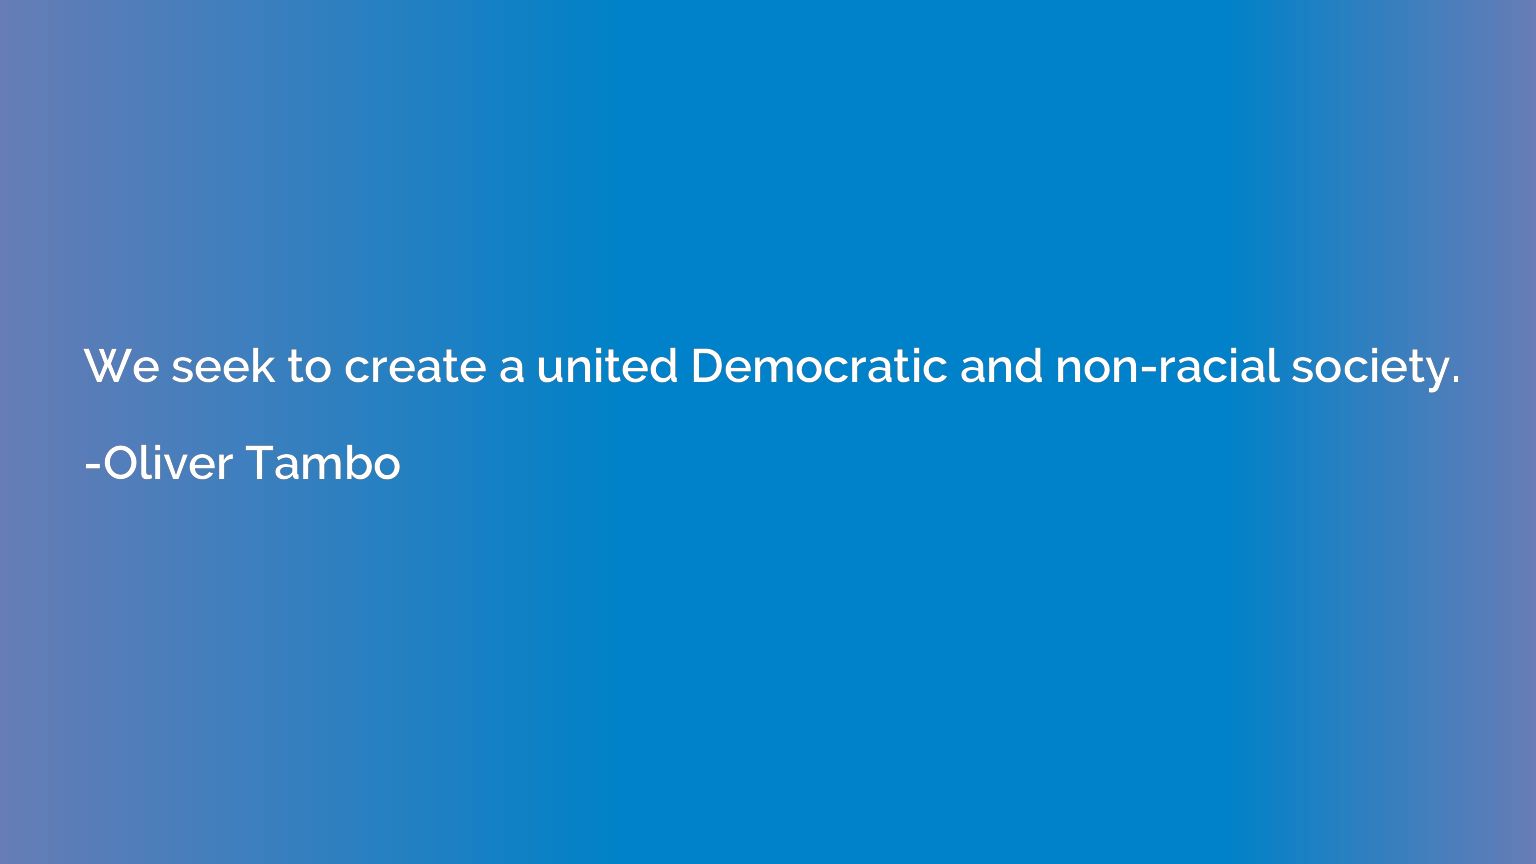 We seek to create a united Democratic and non-racial society